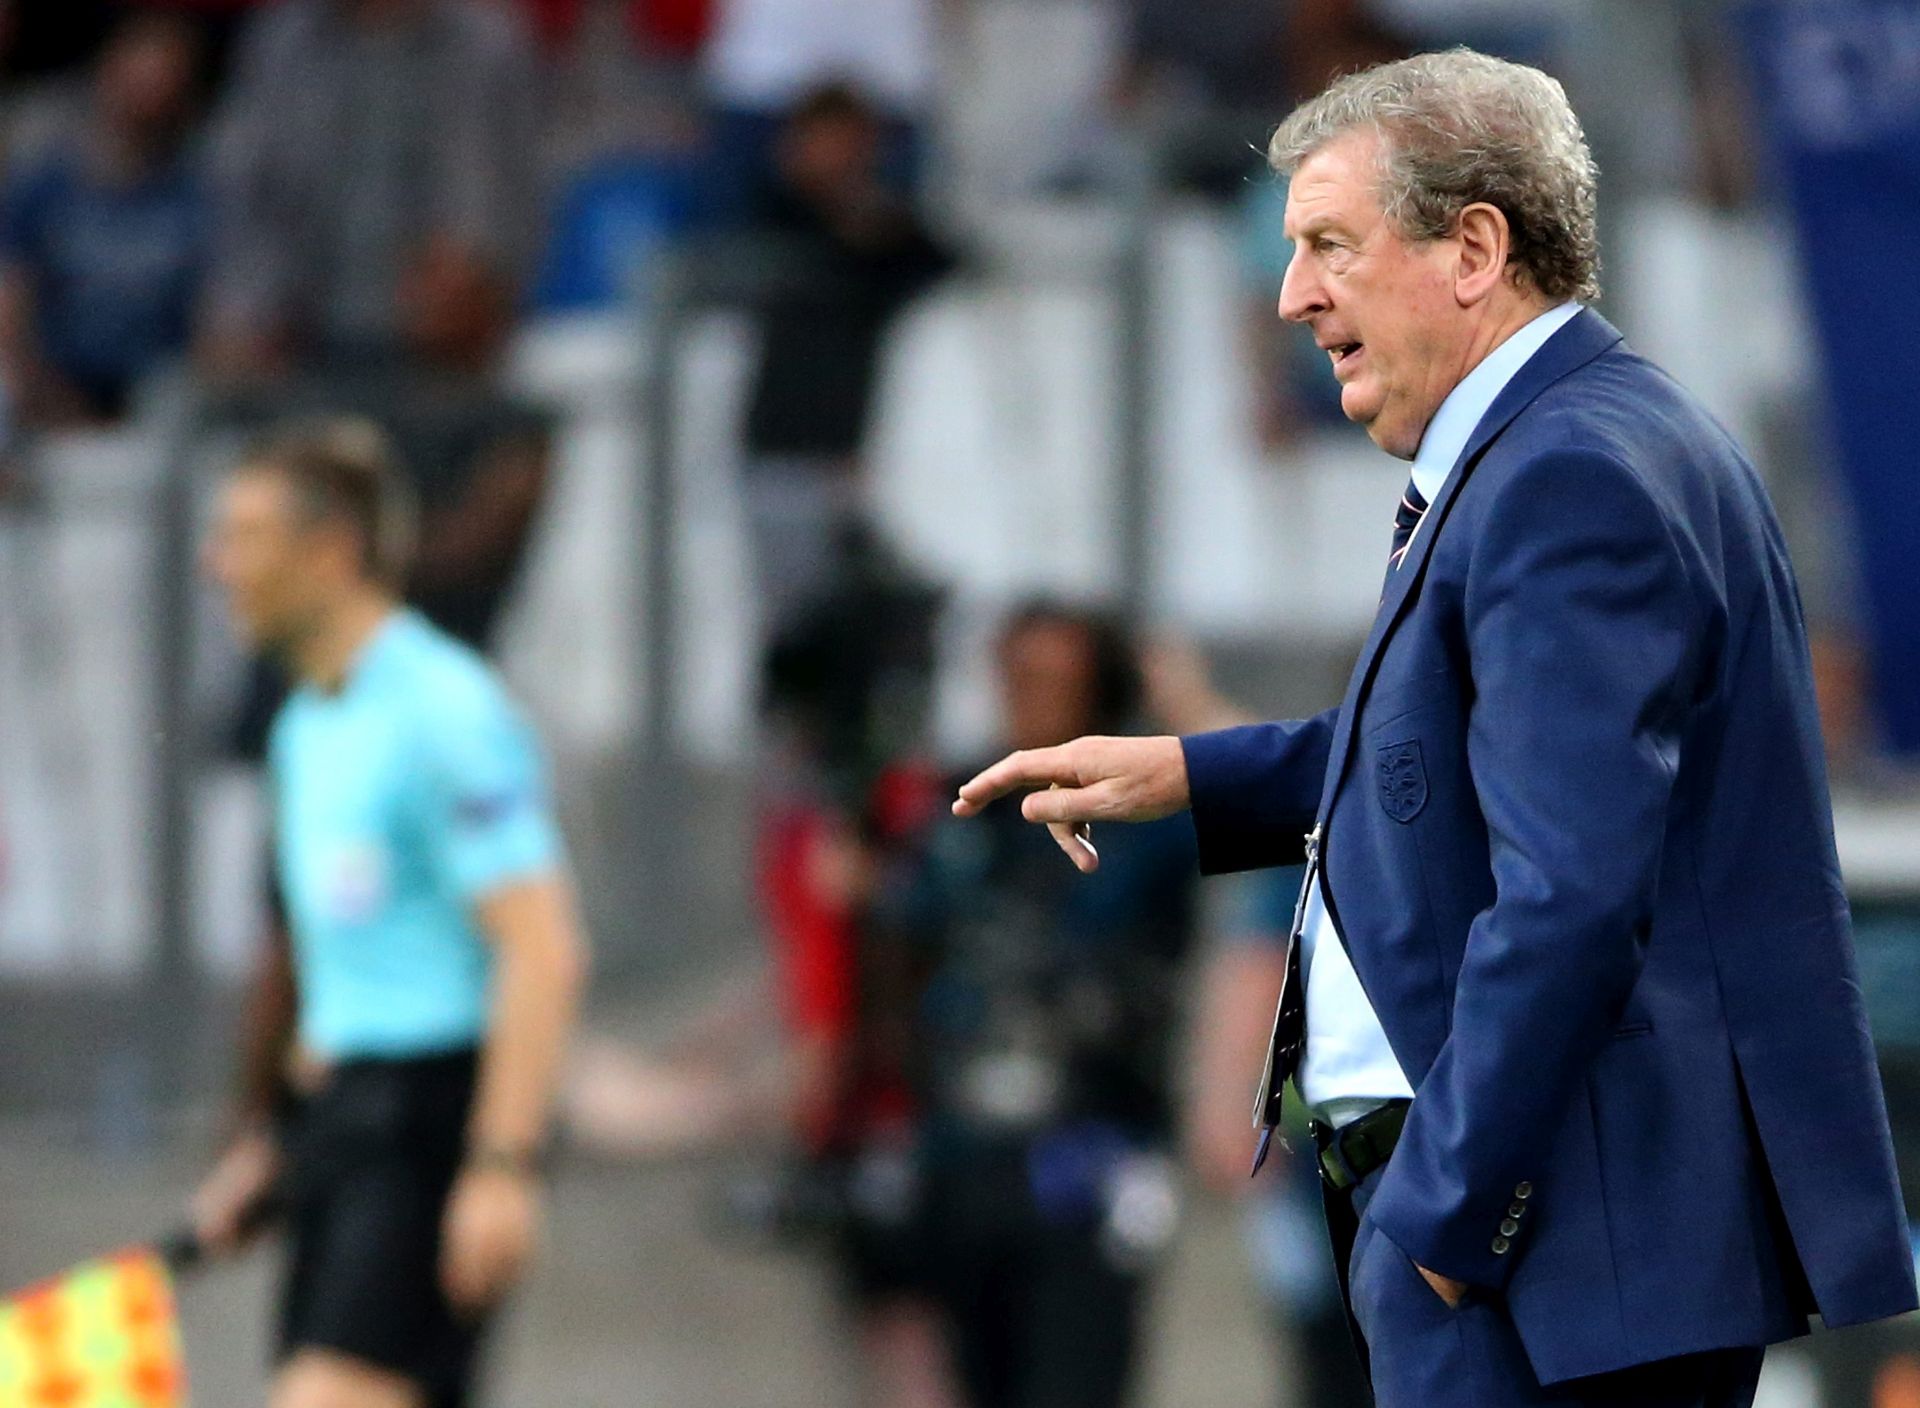 epa05358151 England's coach Roy Hodgson gives instructions during the UEFA EURO 2016 group B preliminary round match between England and Russia at Stade Velodrome in Marseille, France, 11 June 2016.

(RESTRICTIONS APPLY: For editorial news reporting purposes only. Not used for commercial or marketing purposes without prior written approval of UEFA. Images must appear as still images and must not emulate match action video footage. Photographs published in online publications (whether via the Internet or otherwise) shall have an interval of at least 20 seconds between the posting.)  EPA/TOLGA BOZOGLU   EDITORIAL USE ONLY  EPA/TOLGA BOZOGLU   EDITORIAL USE ONLY  EDITORIAL USE ONLY